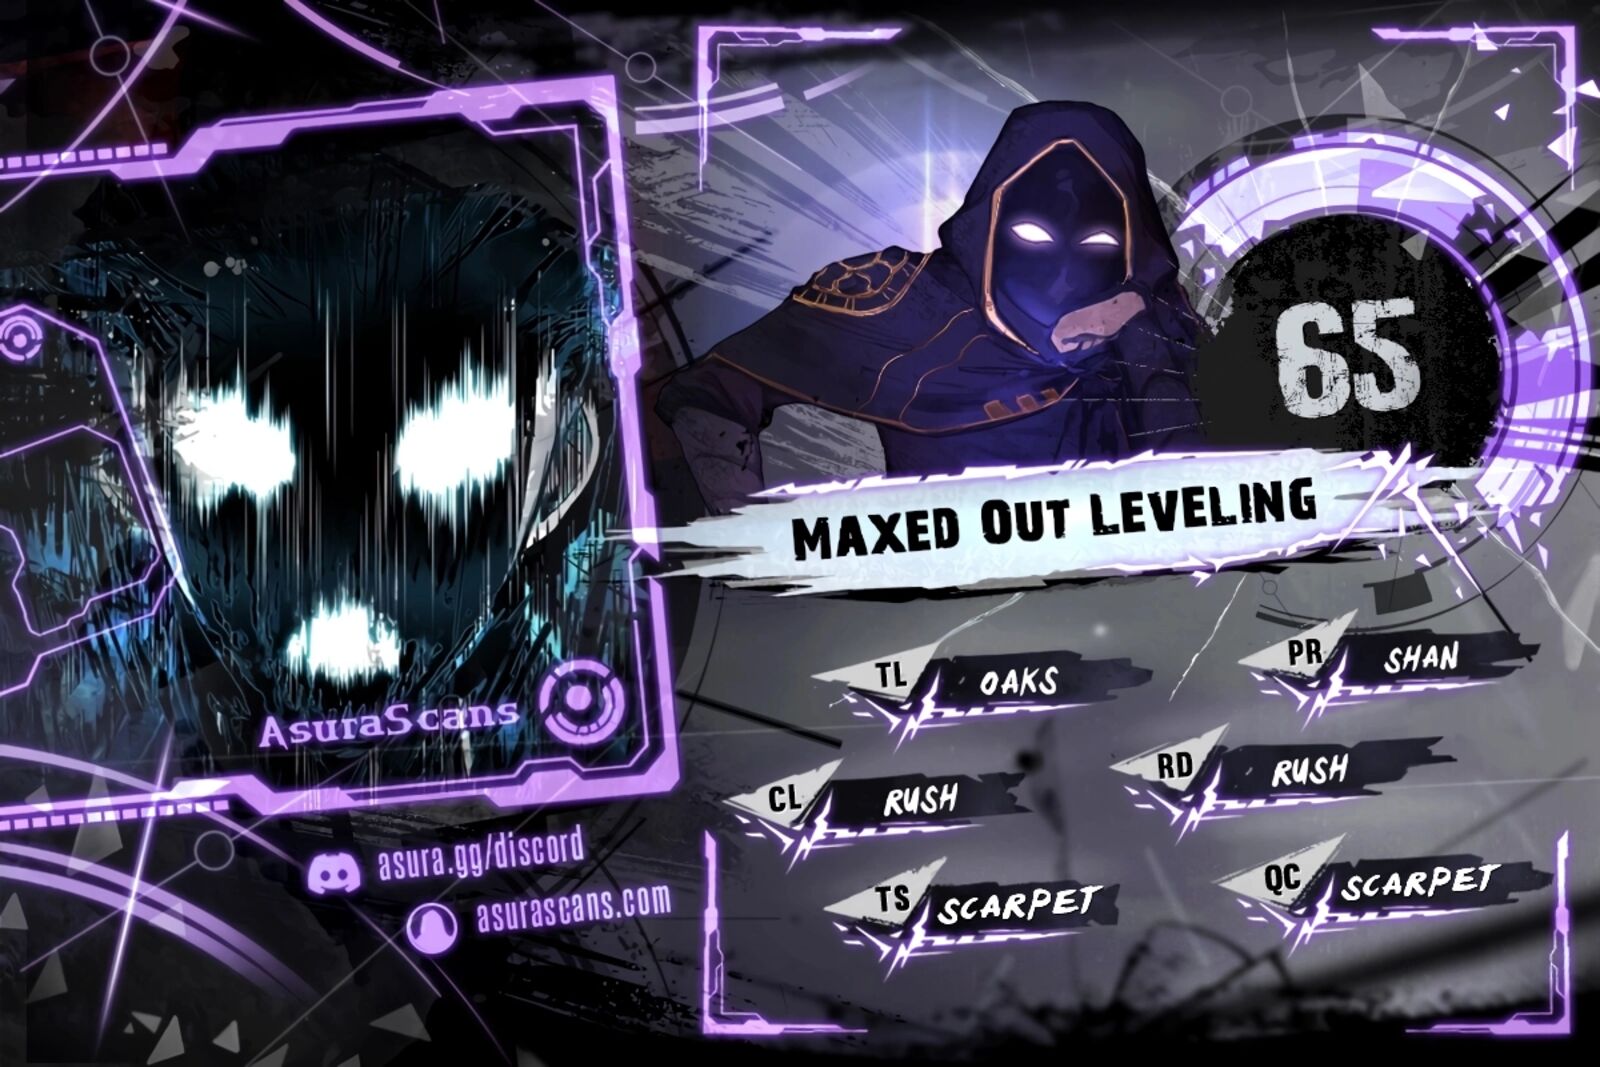 Maxed Out Leveling 65 1